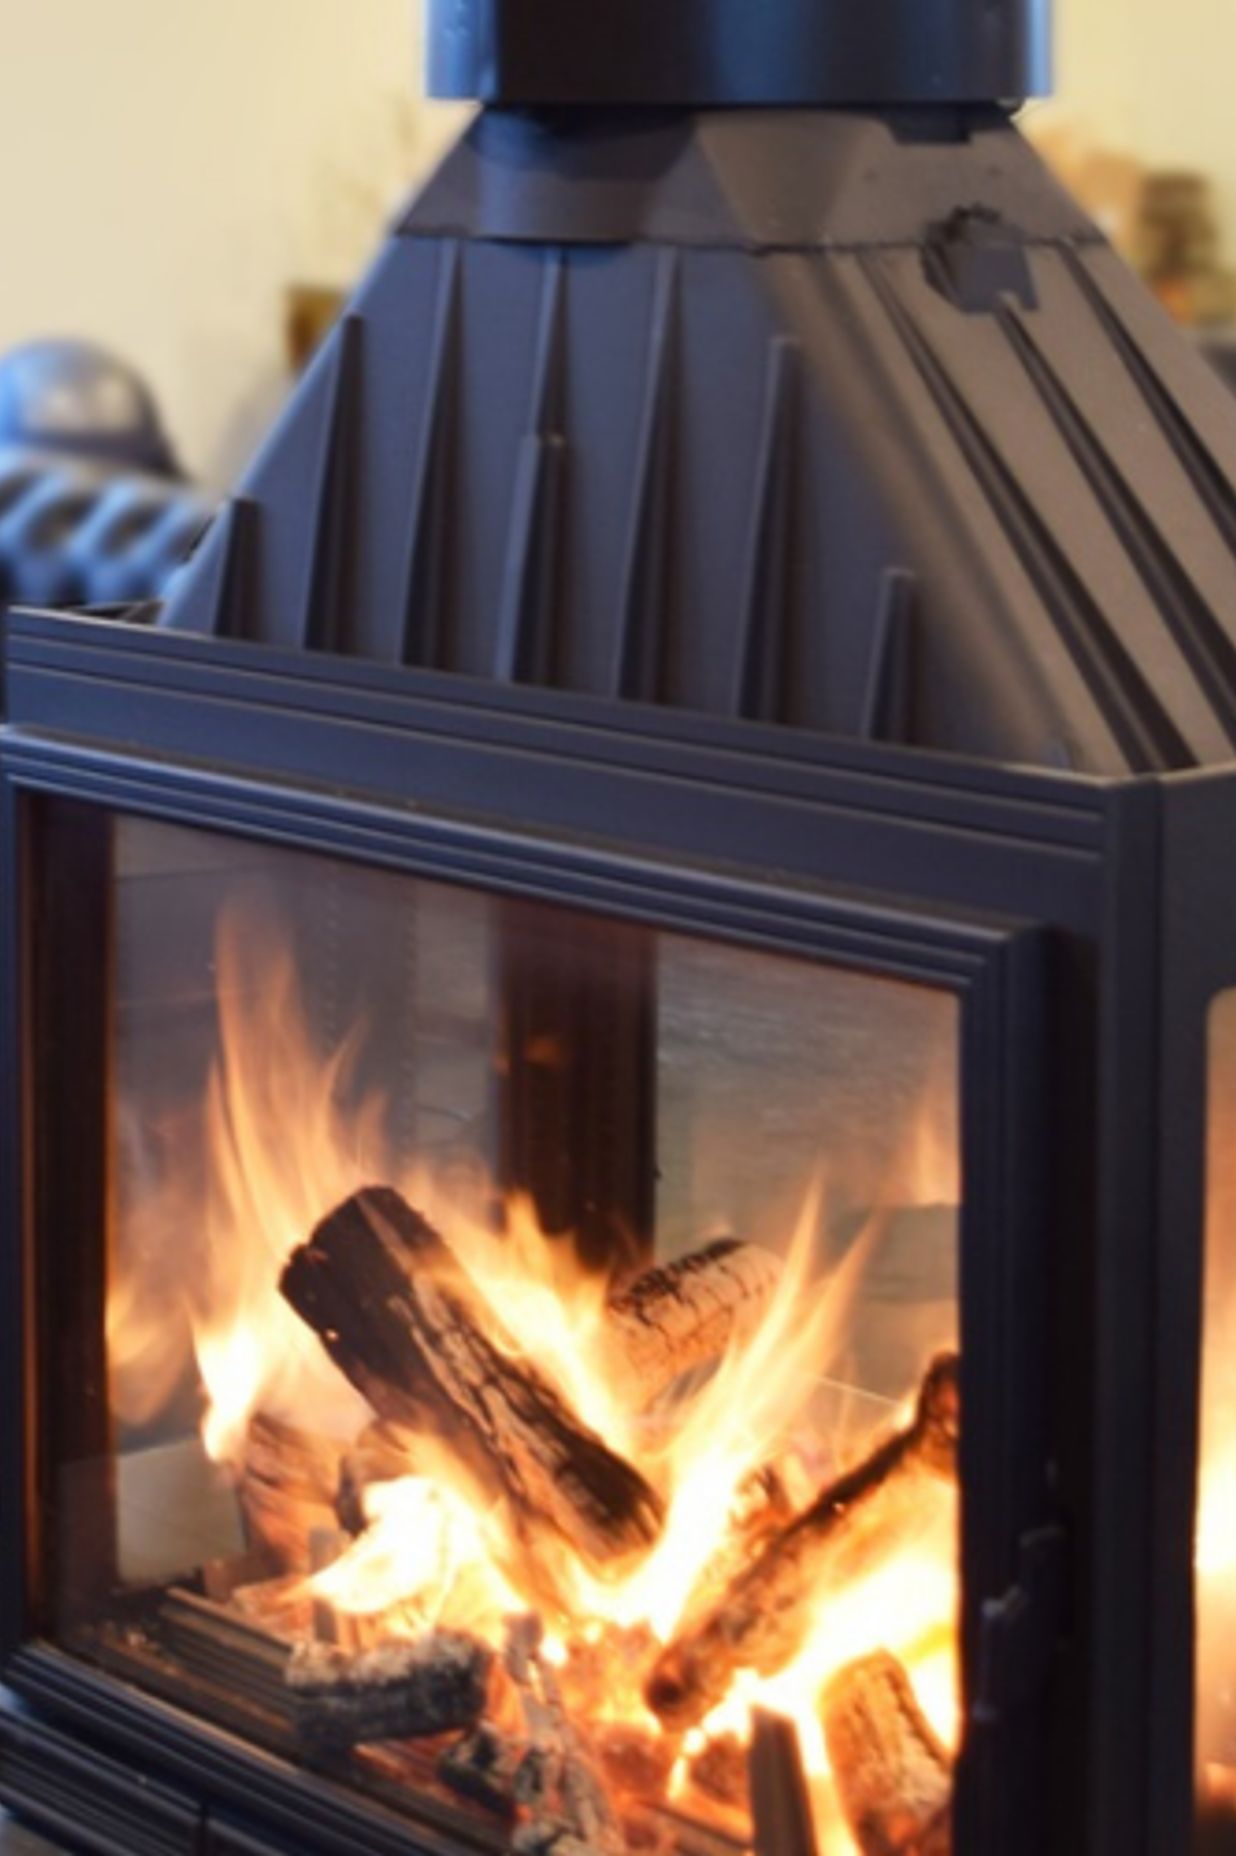 Seguin Wood Fireplaces: A French Flame